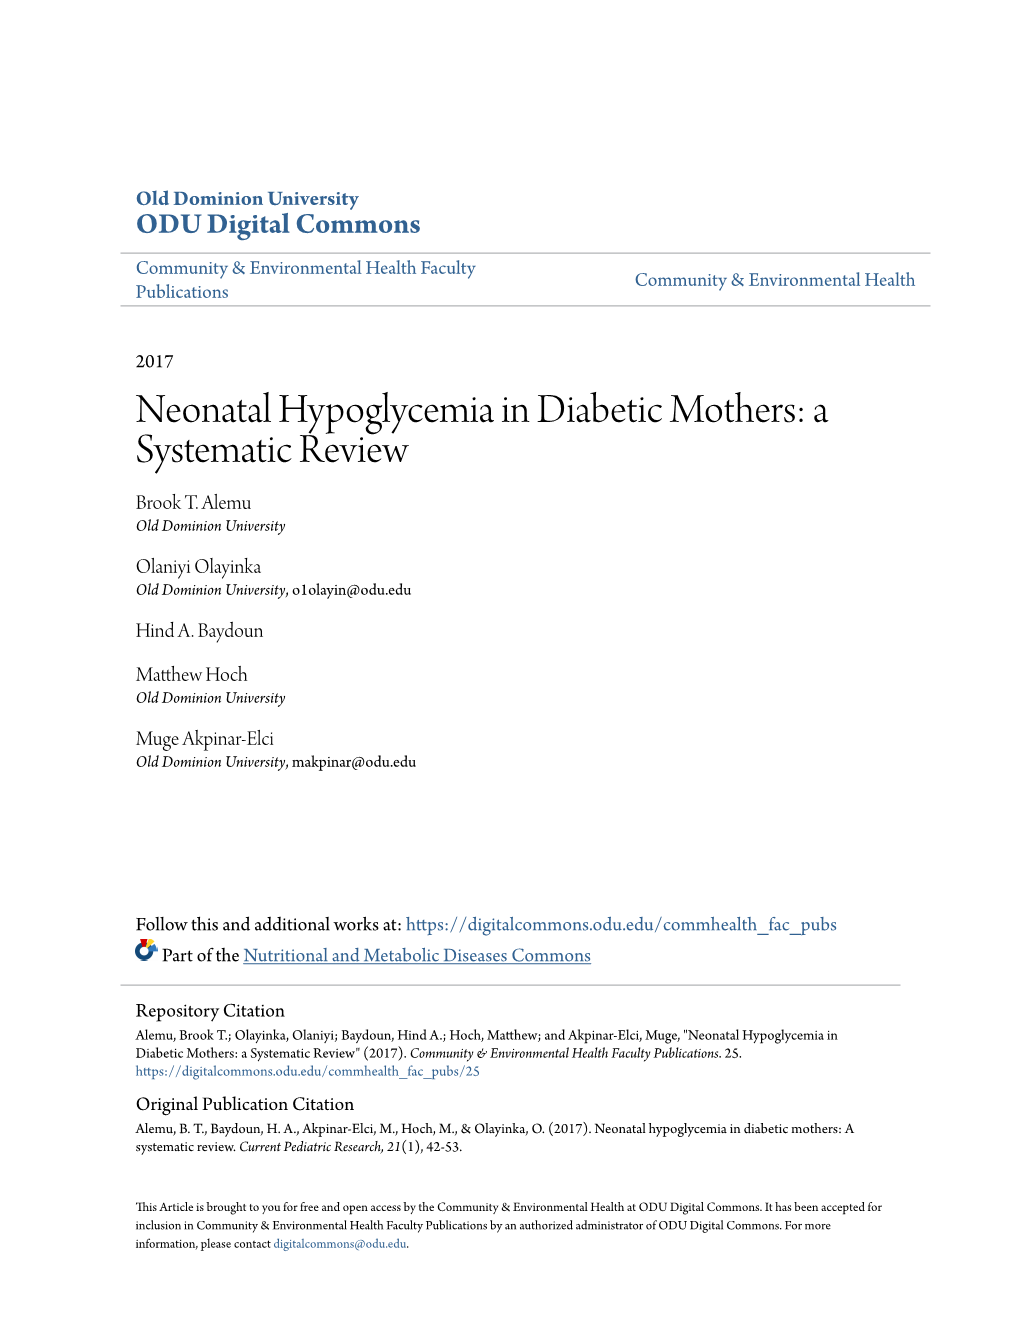 Neonatal Hypoglycemia in Diabetic Mothers: a Systematic Review Brook T